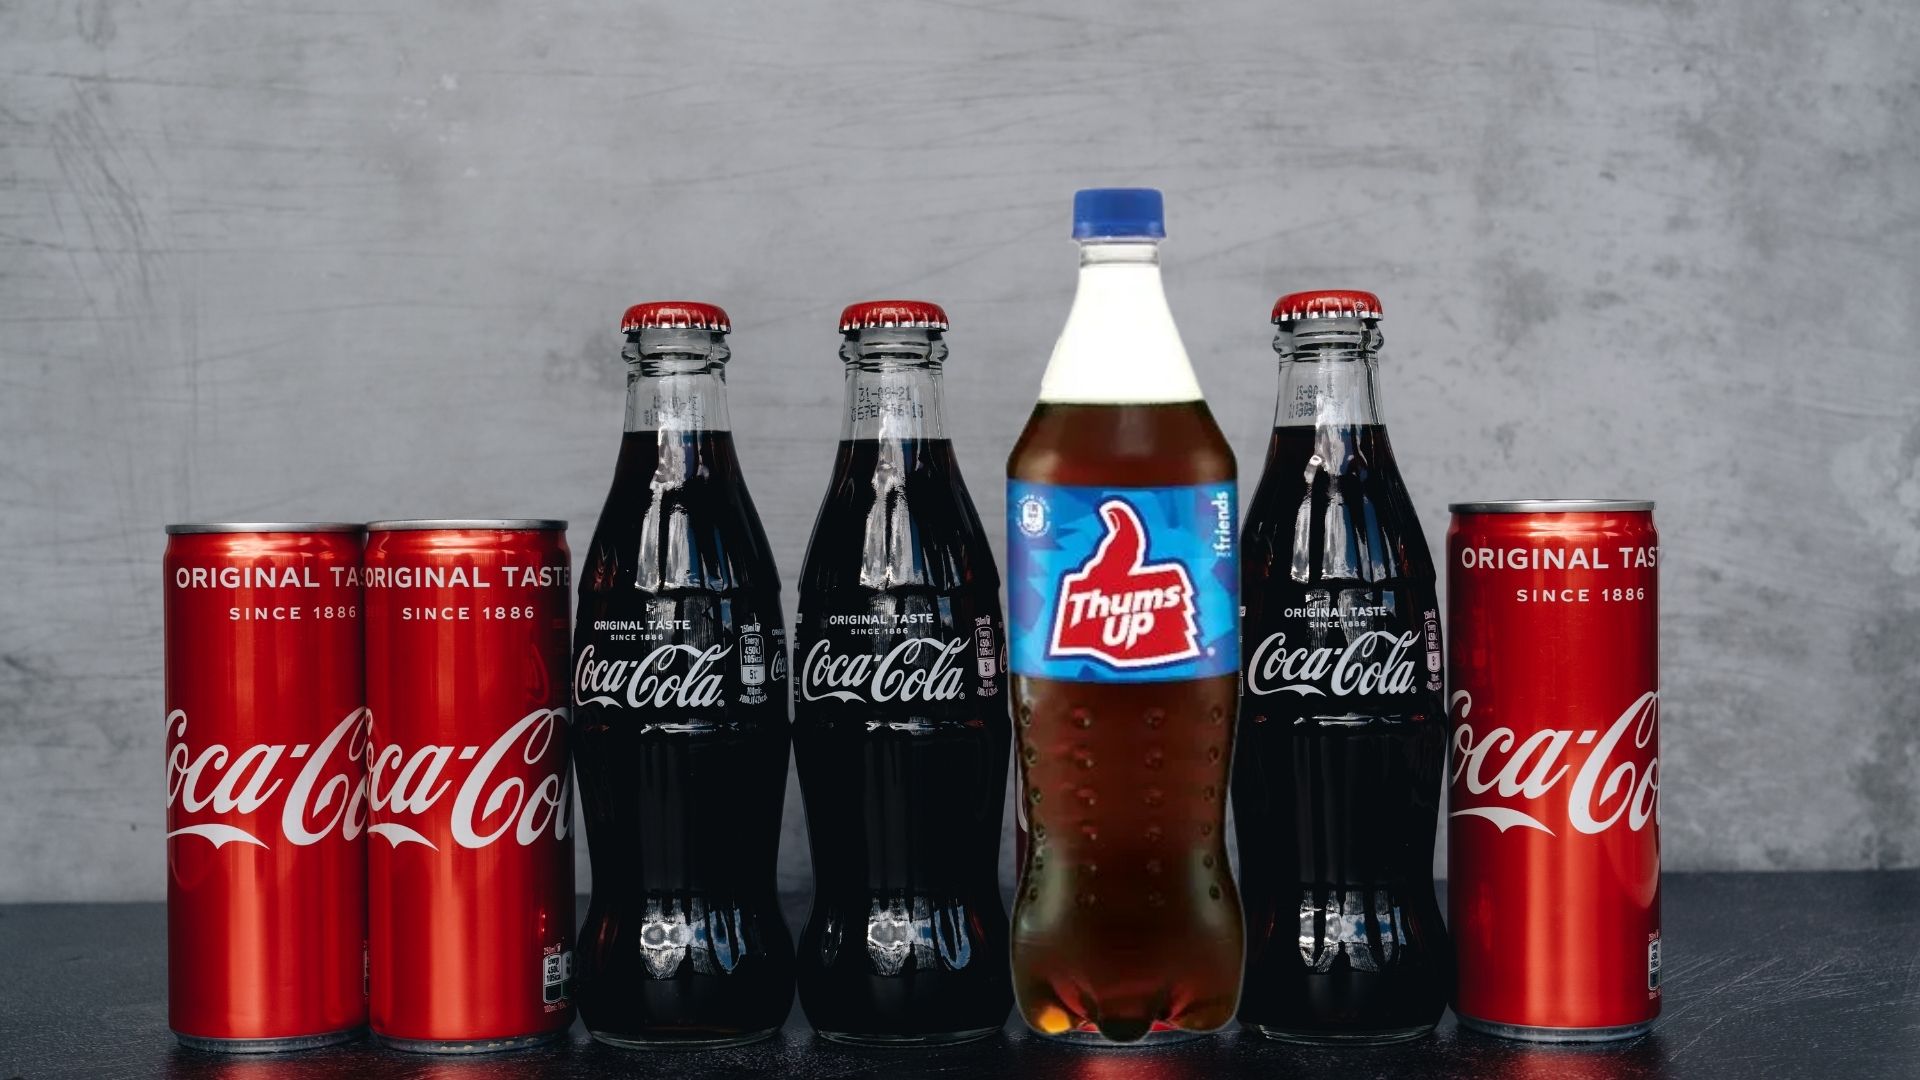 coca-cola india tastes the thunder, thums up is company's first $1 bln brand